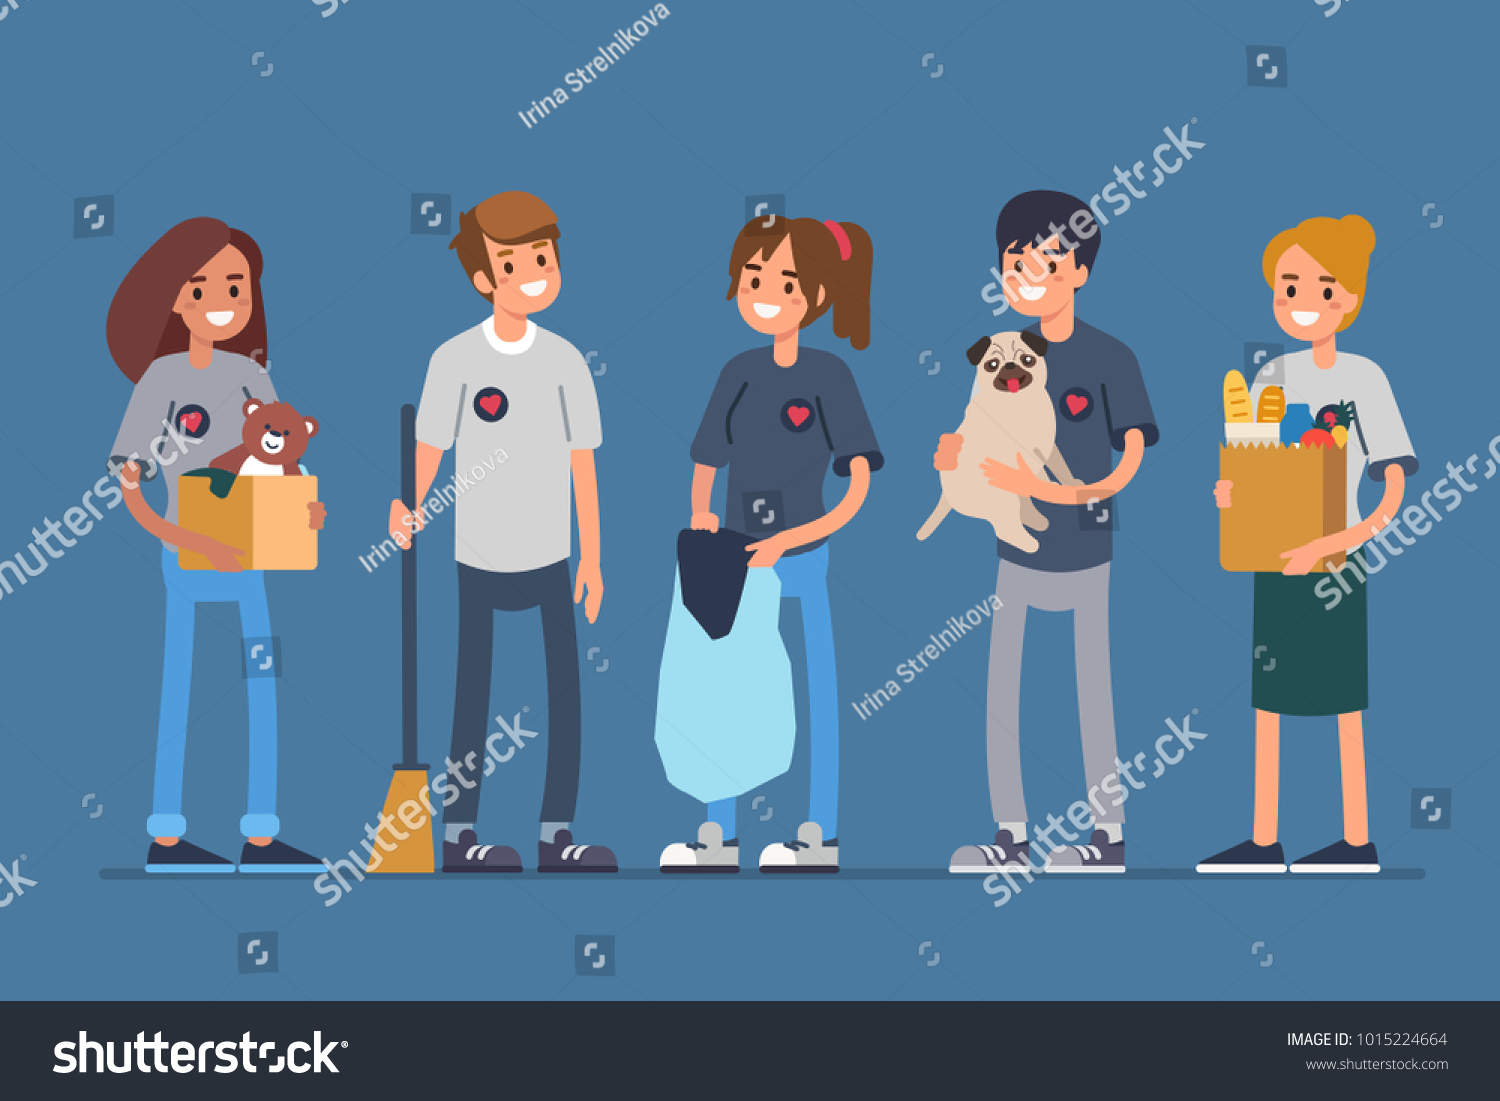 SVG of 
Group volunteers standing together. Flat style vector illustration isolated. svg